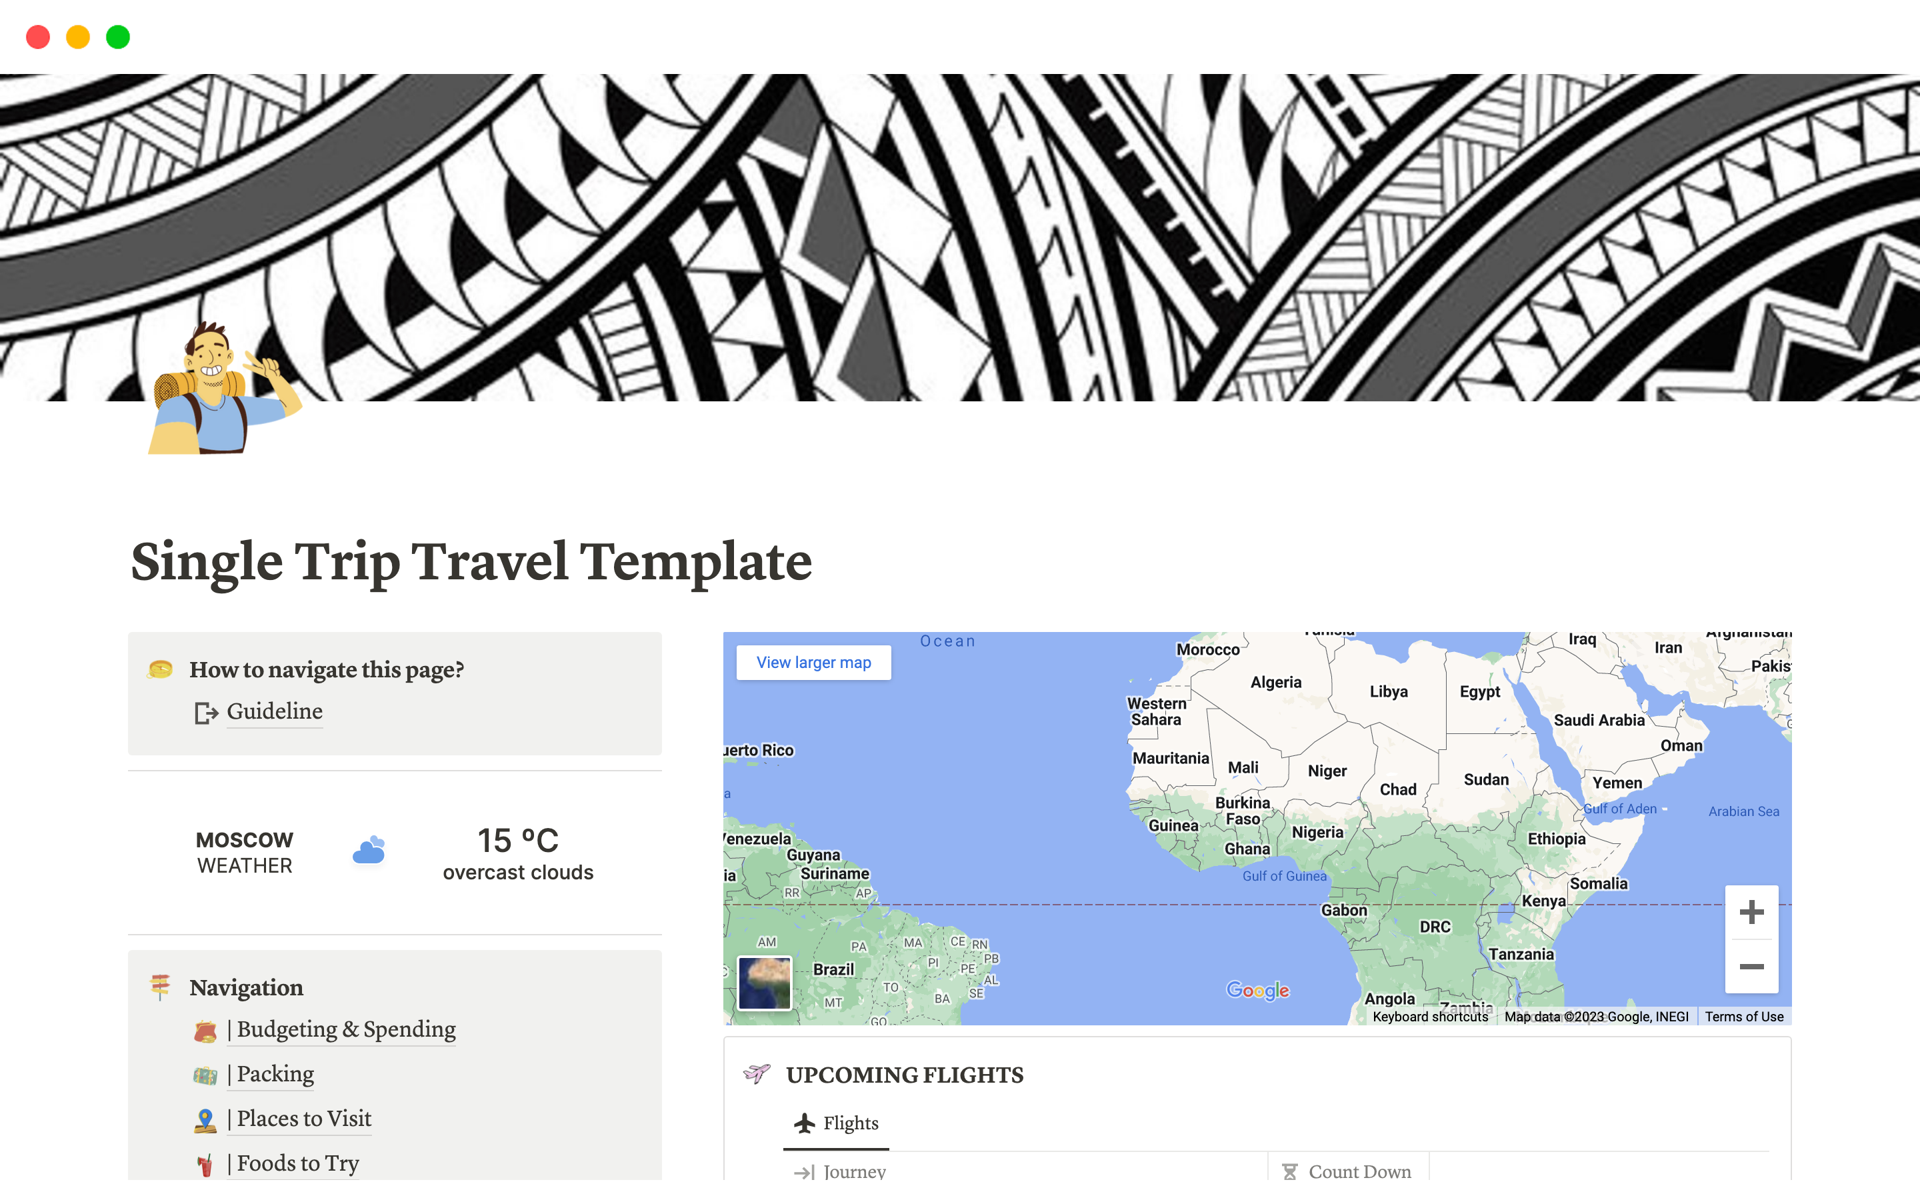 Simplify your journey and capture every precious moment effortlessly with this user-friendly yet comprehensive travel companion. With this travel planner/dashboard Notion template, you'll unlock a plethora of features, including: